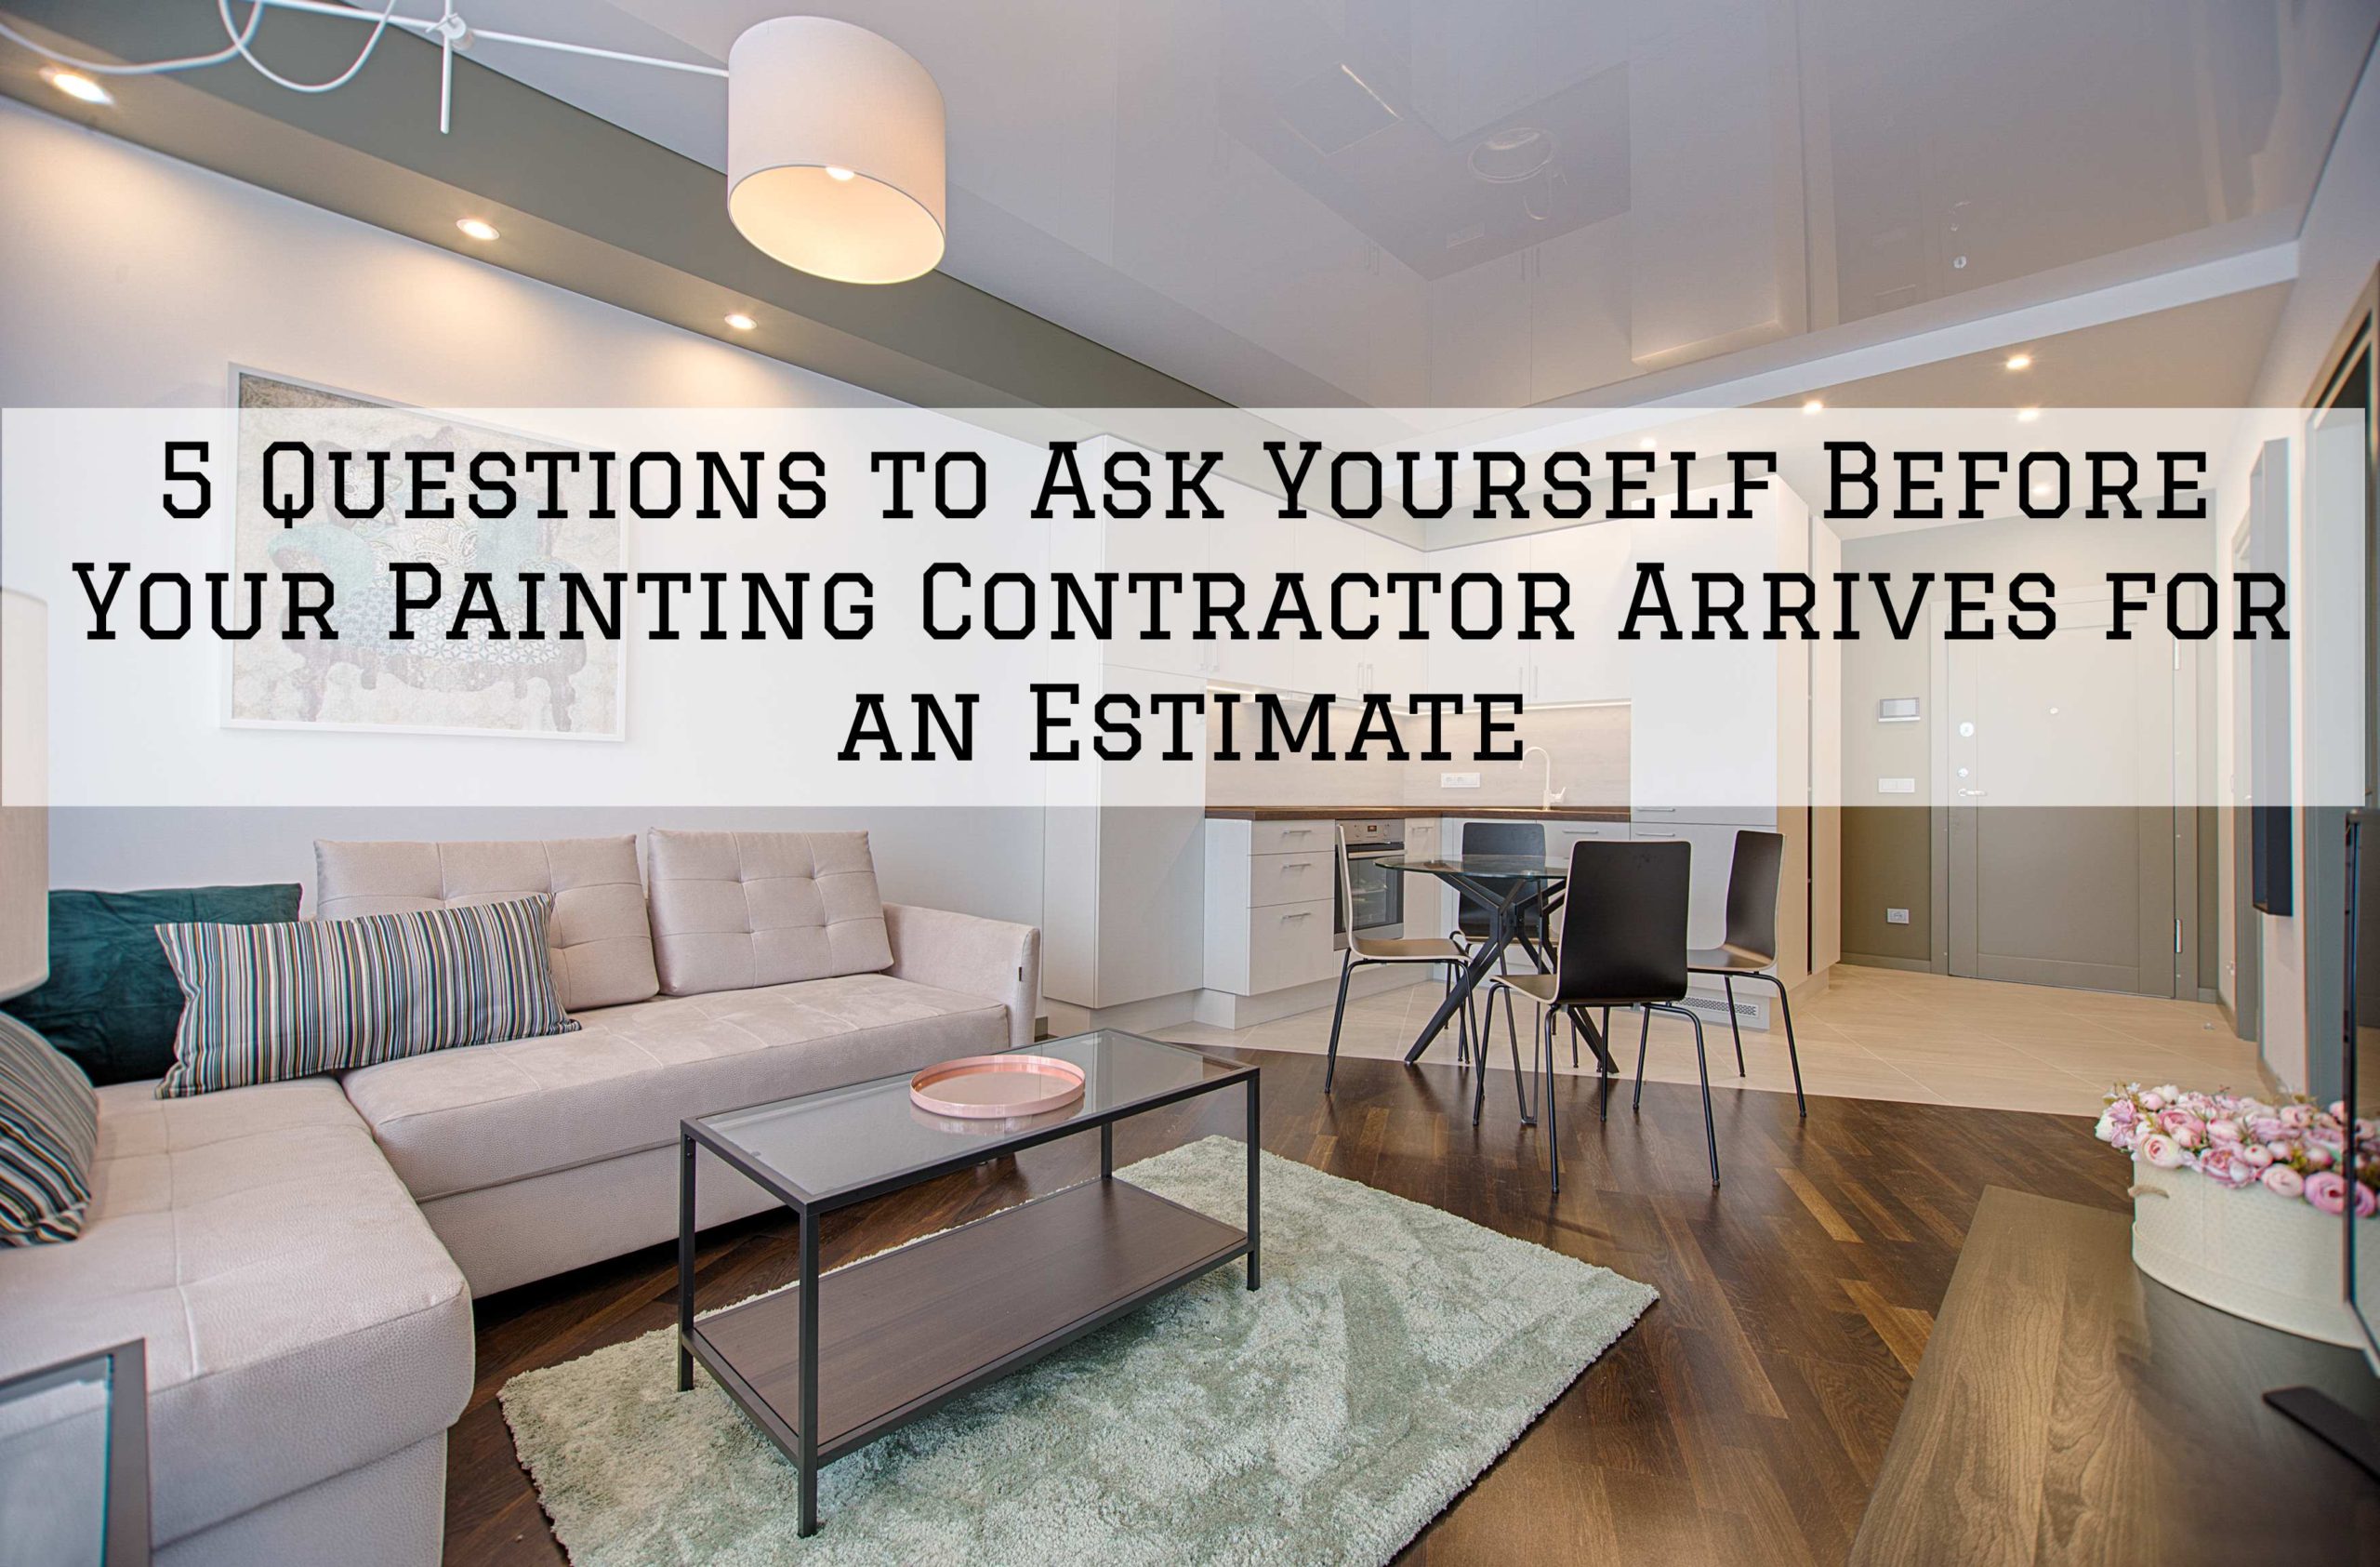 5 Questions to Ask Yourself Before Your Painting Contractor Arrives for an Estimate in Ottawa, Ontario